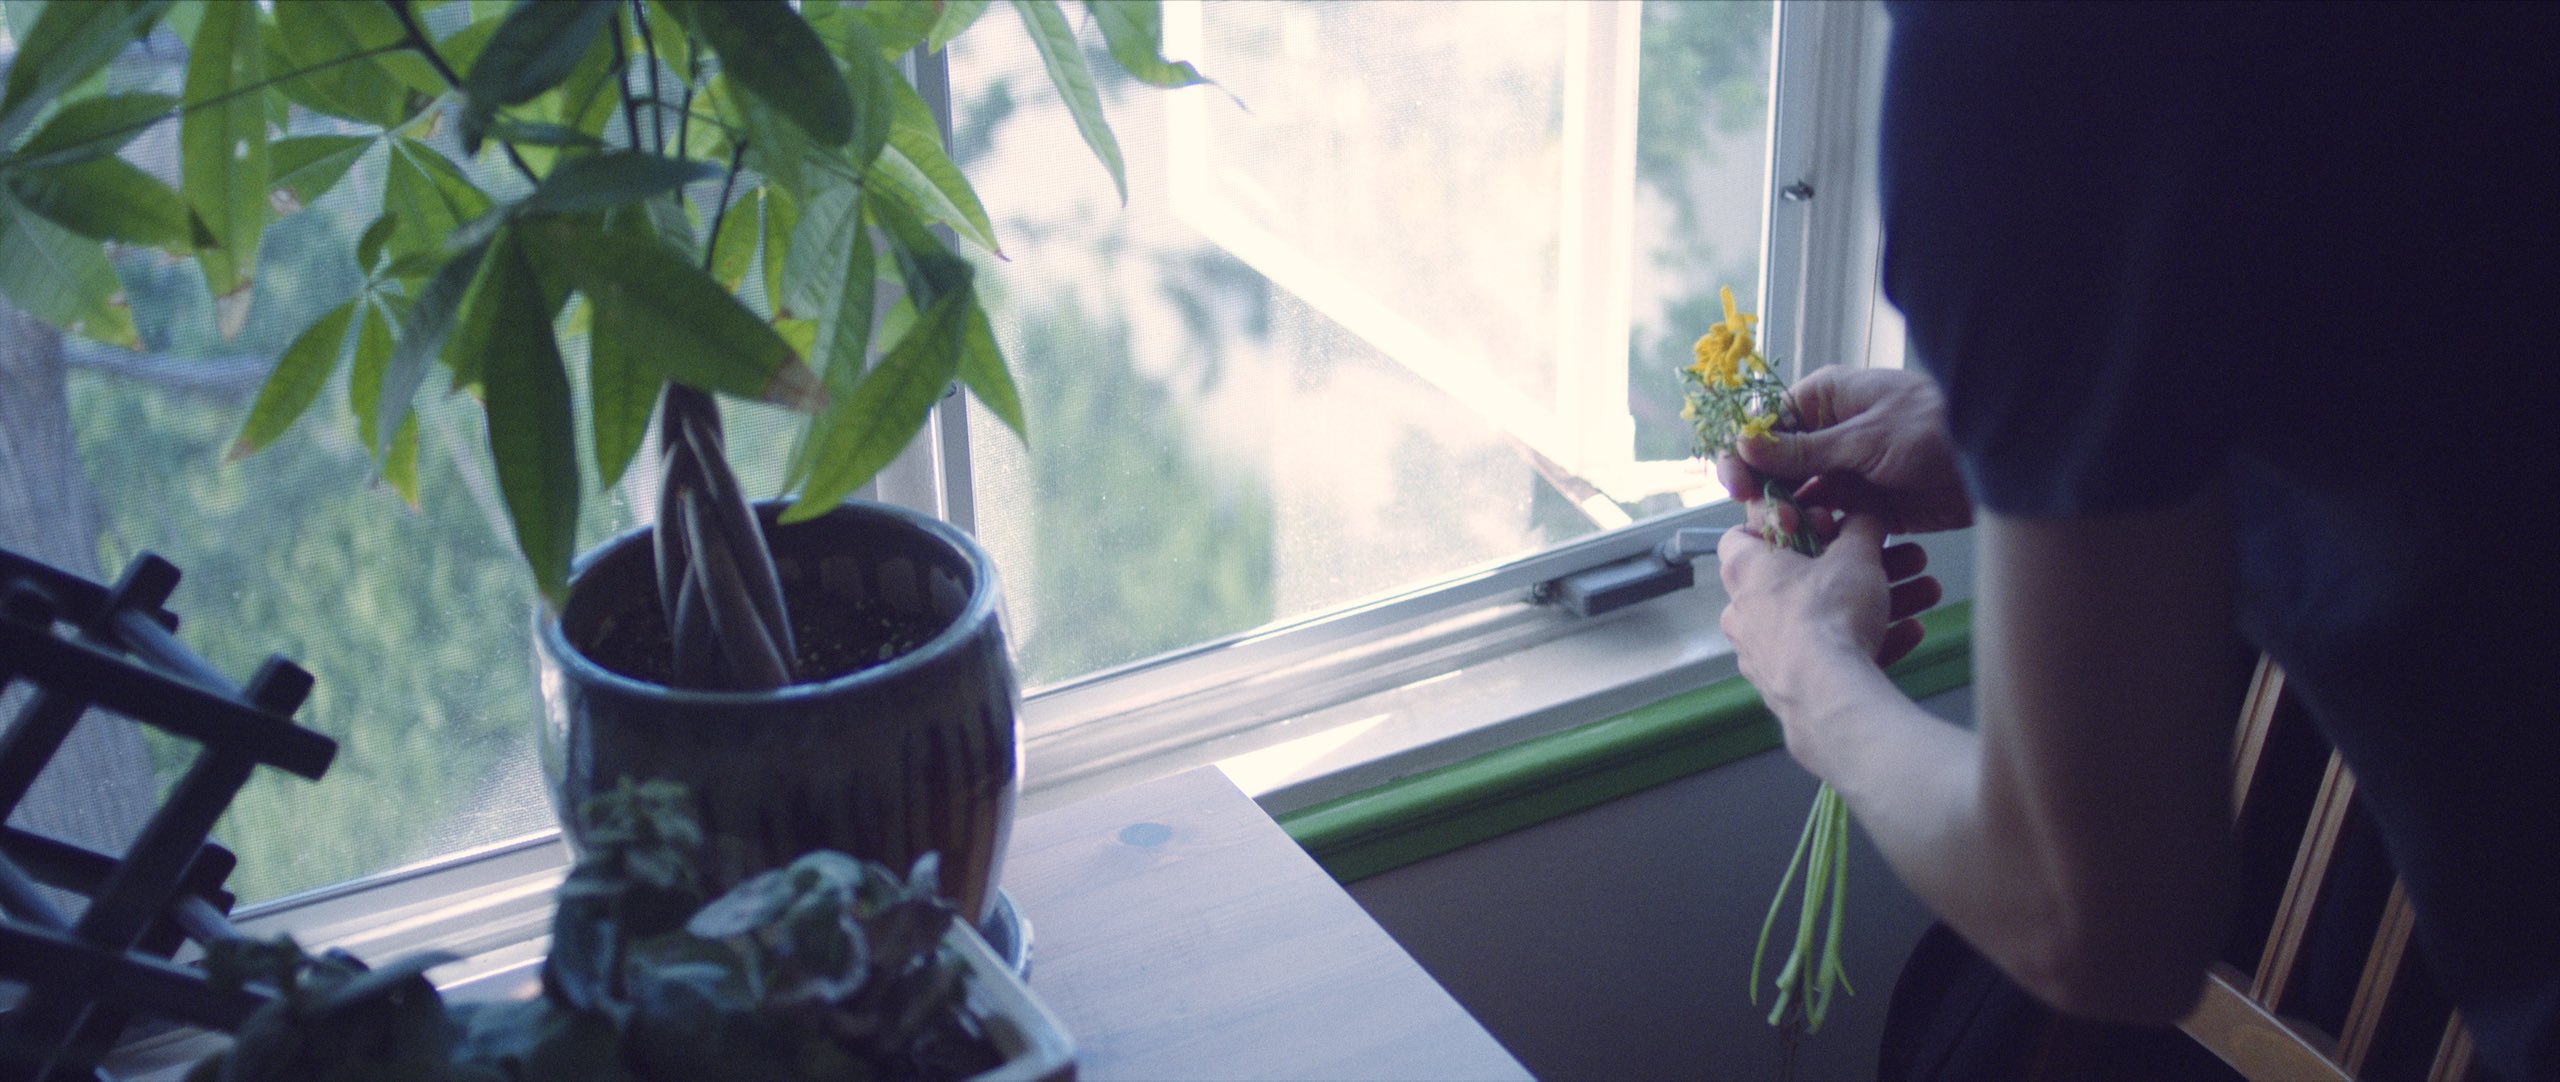 Jellyfish Short Film Produced by C&I Studios Person holding yellow flowers by a window with plants nearby on a table